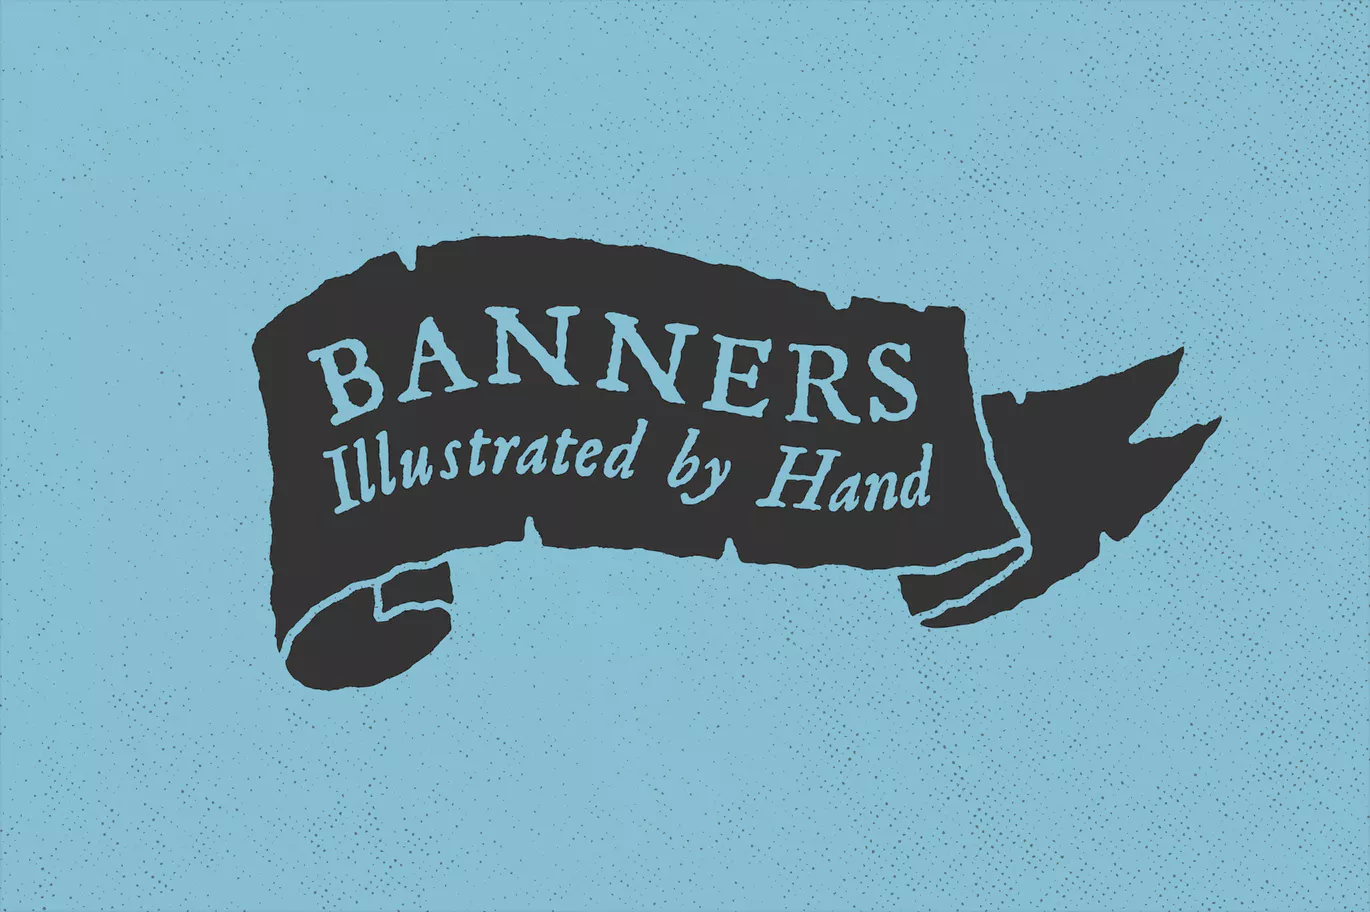 Hand illustrated banners vectors